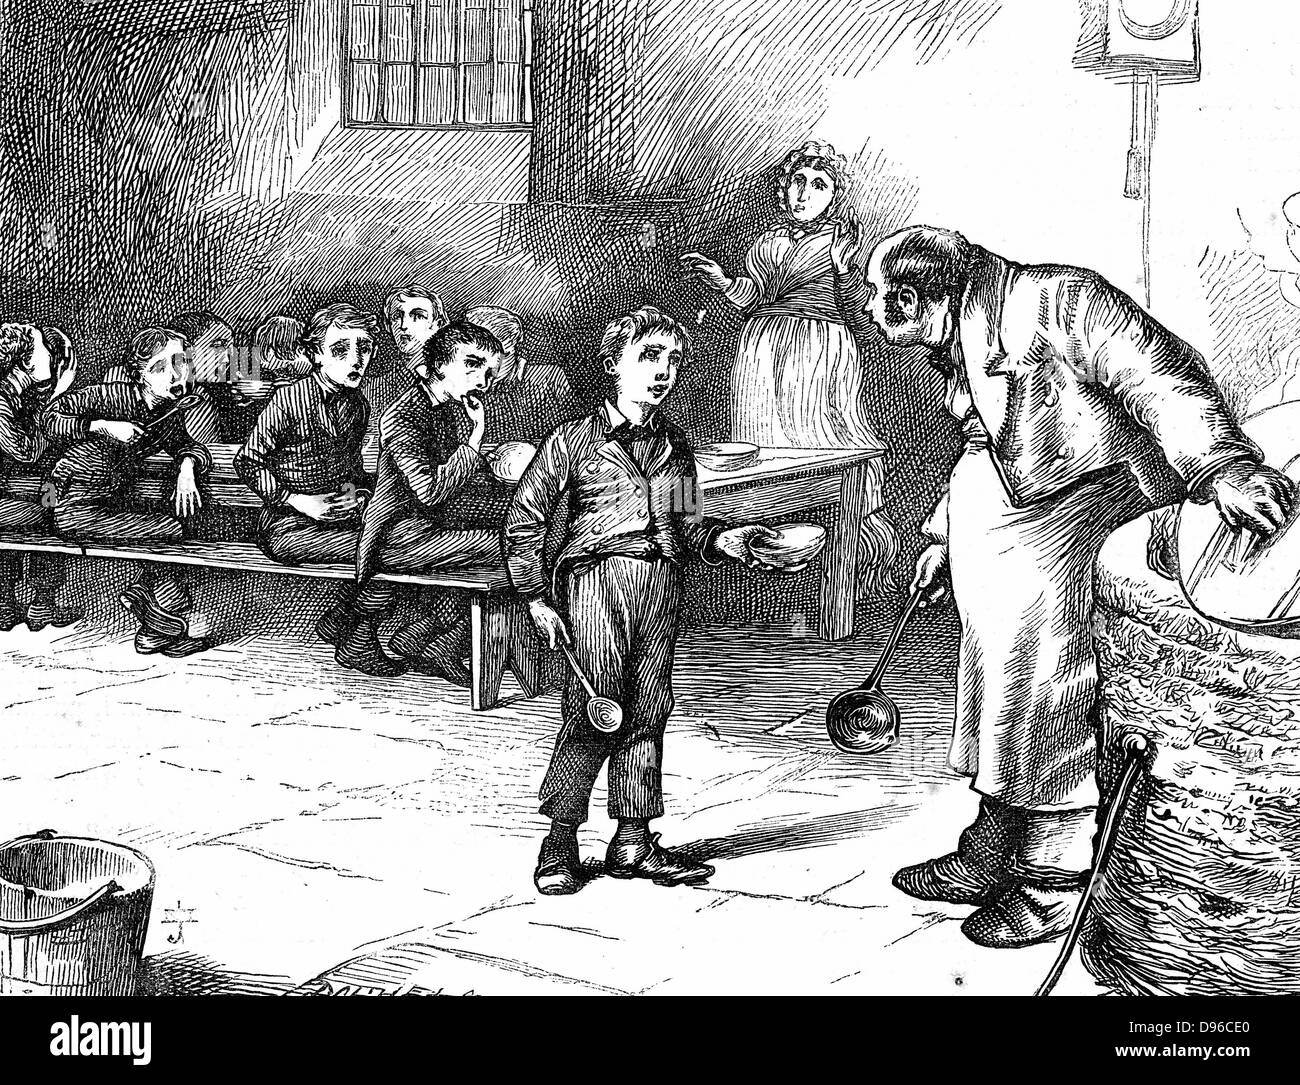 Oliver Twist causing a sensation in the children's ward of the workhouse by asking for a second helping of porridge. In the background his starving companions polish their bowls and spoons in their hunger. Illustration by J Mahoney (active 1856-1876) for Household Edition of Charles Dickens 'The Adventures of Oliver Twist', London, 1871. Engraving. Stock Photo